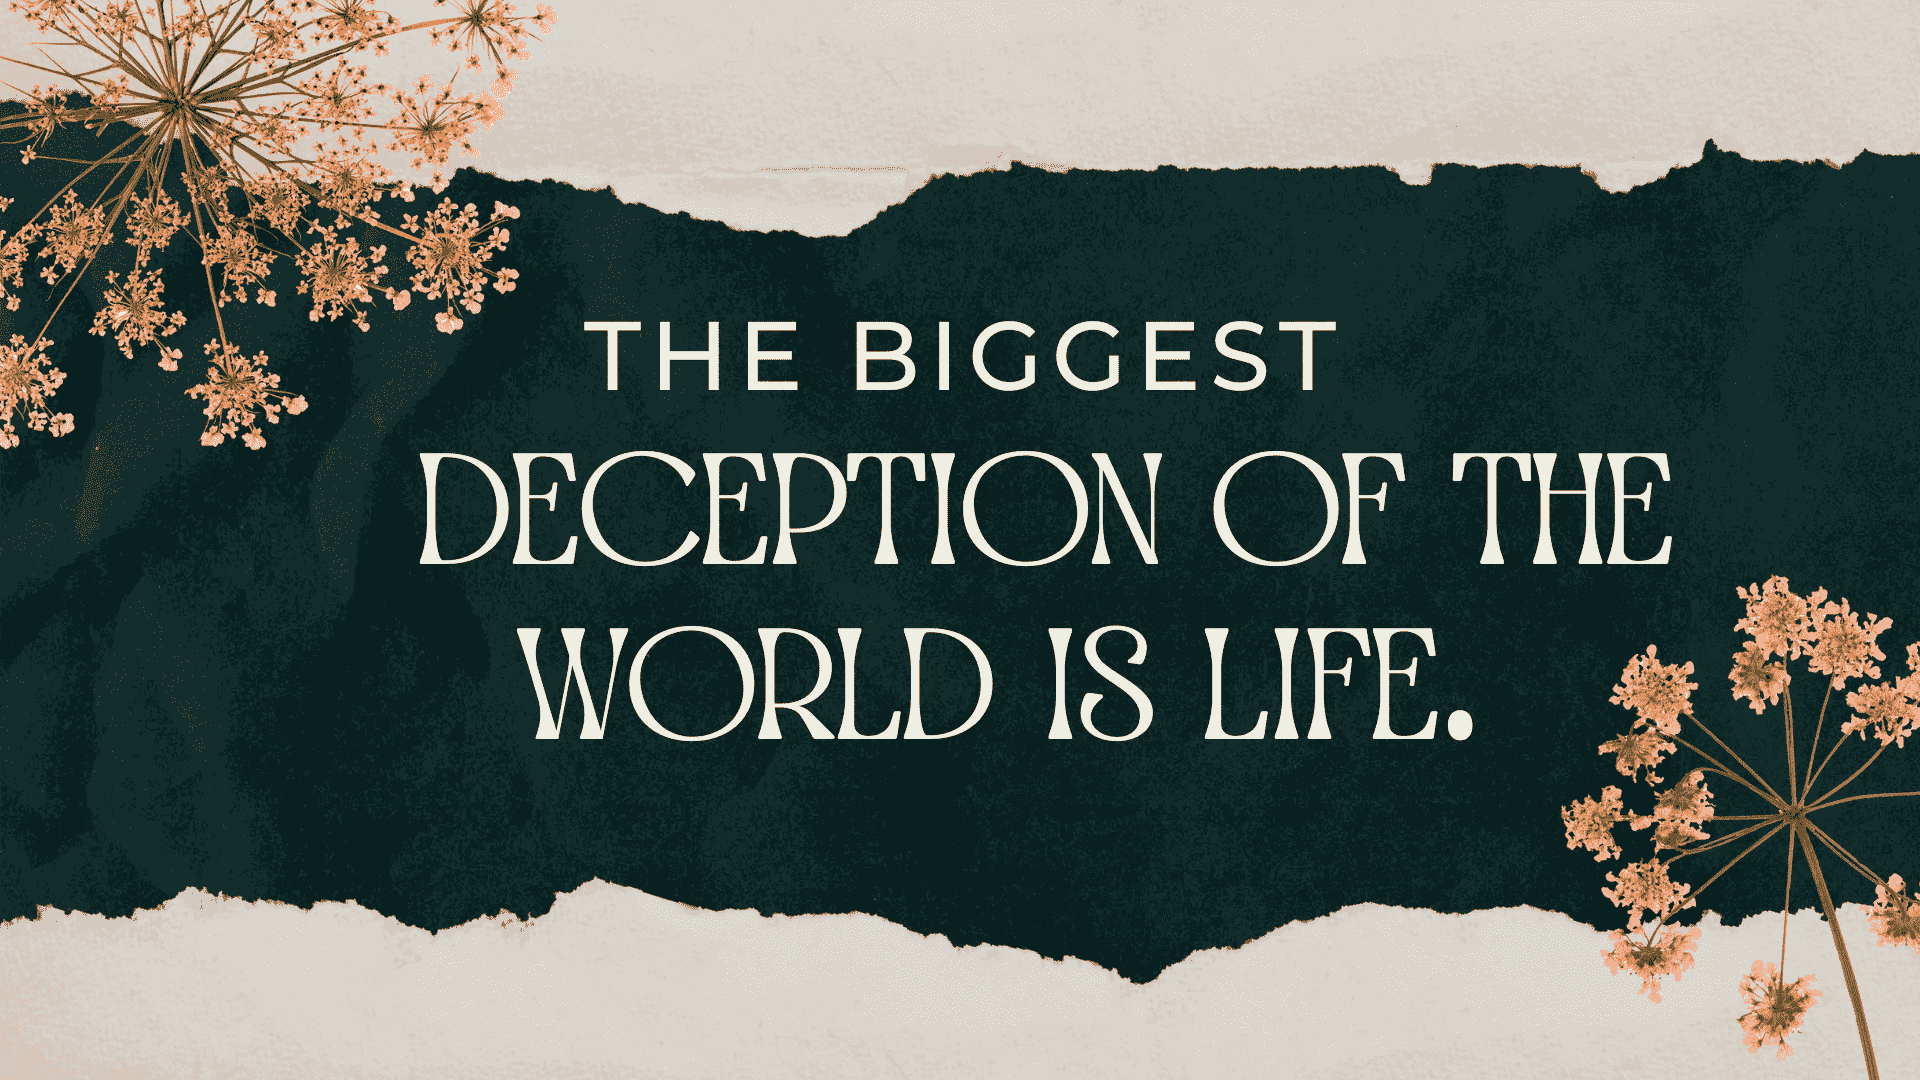 What is the greatest truth, big deception and sweetest thing in the world?